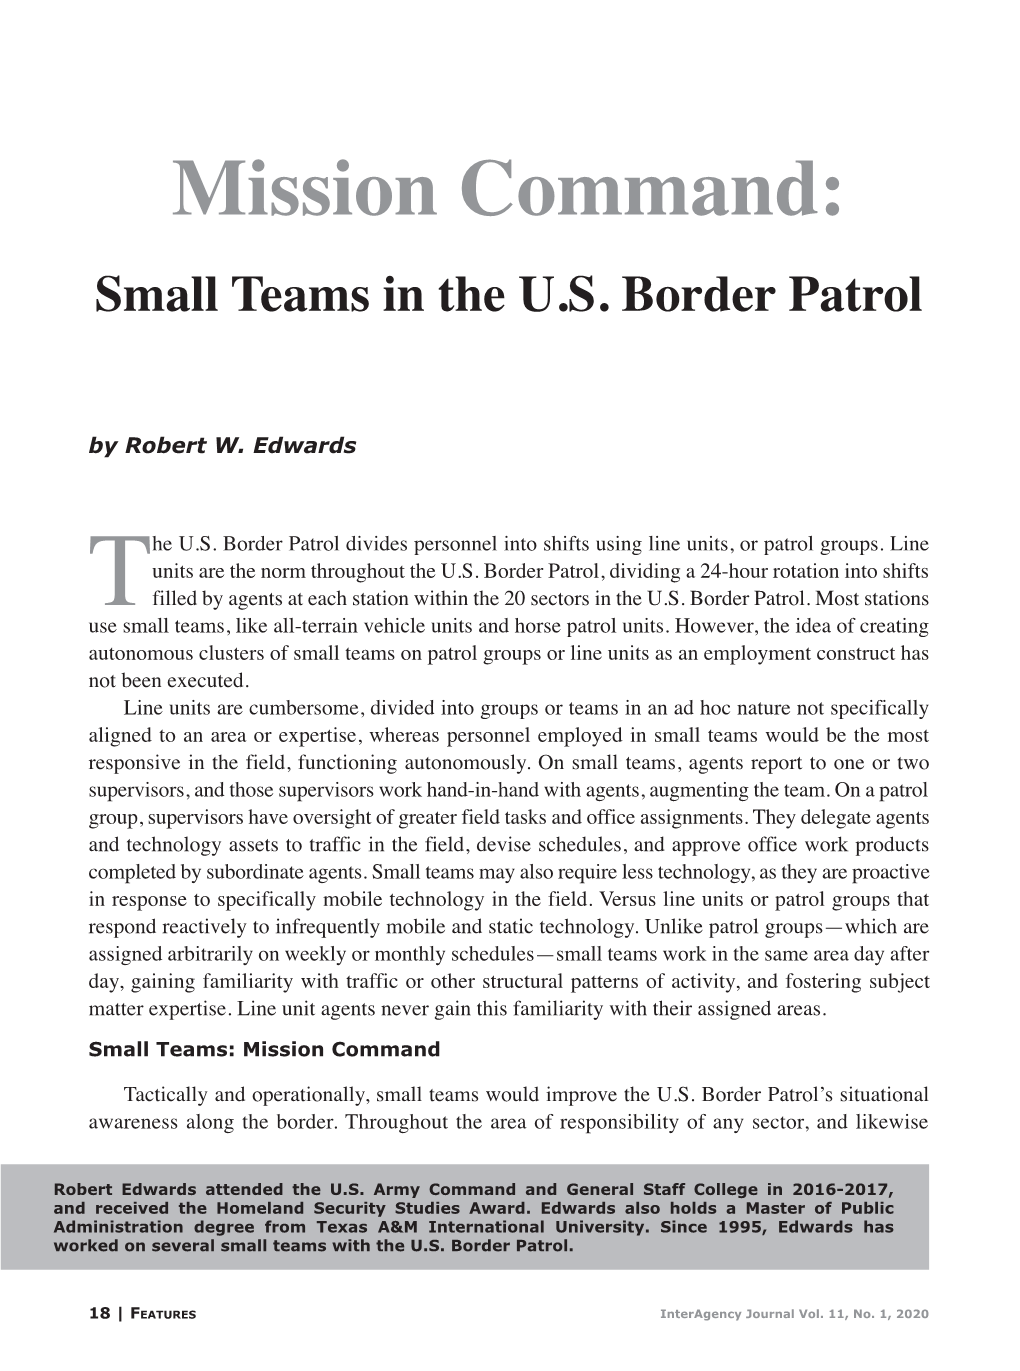 Mission Command: Small Teams in the U.S. Border Patrol